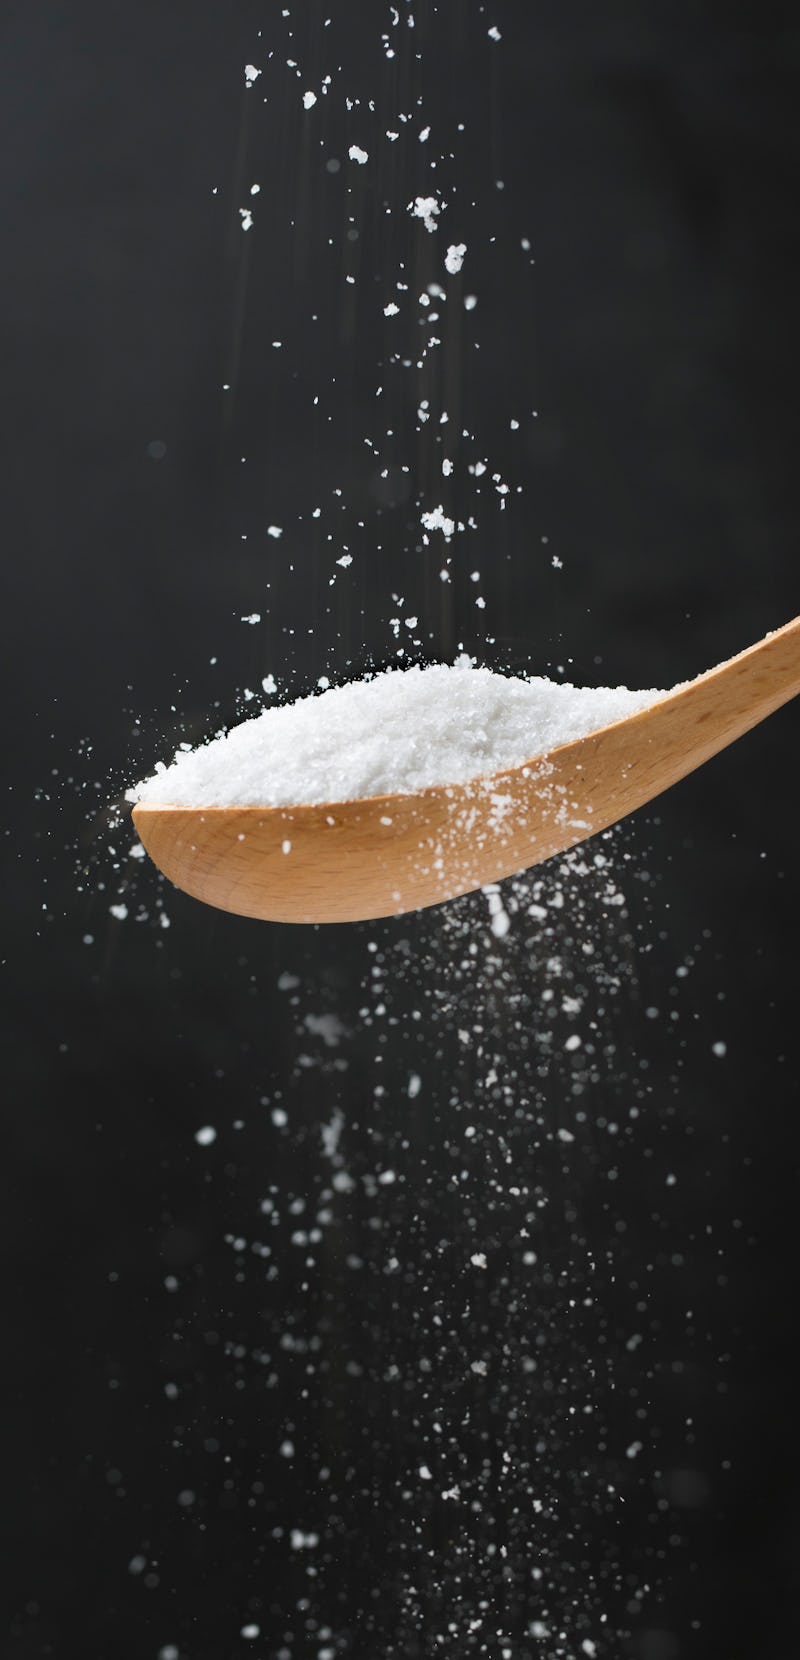 Salt flowing into a wooden spoon on black background. Close up image.